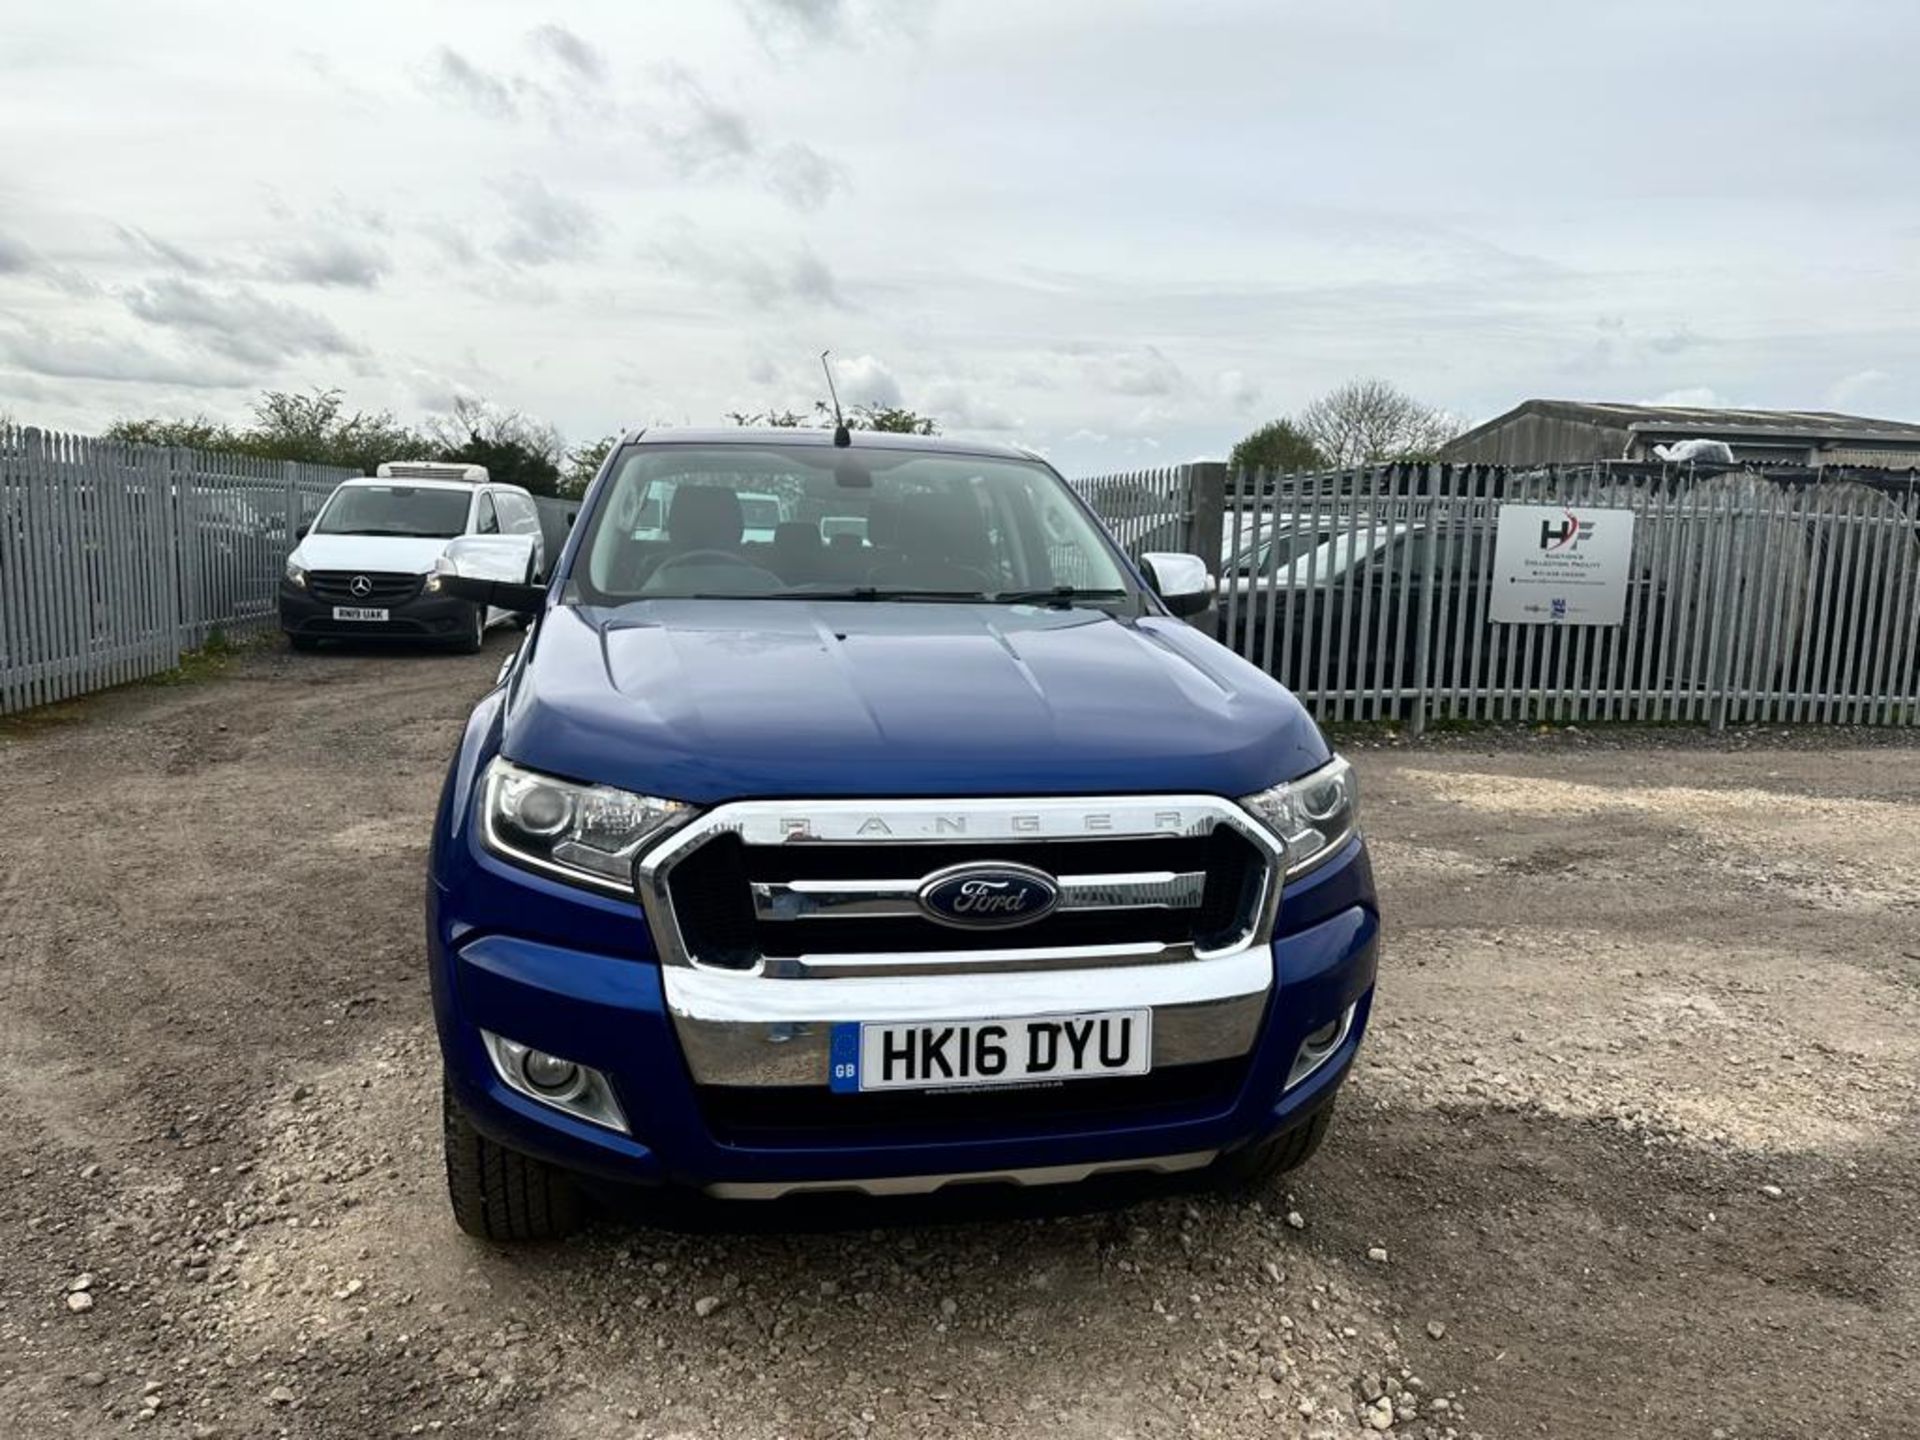 ** ON SALE ** Ford Ranger Limited DCI TDCI 160 4X4 2016 '16 Reg'-Automatic - A/C - -Bluetooth-No Vat - Image 3 of 38